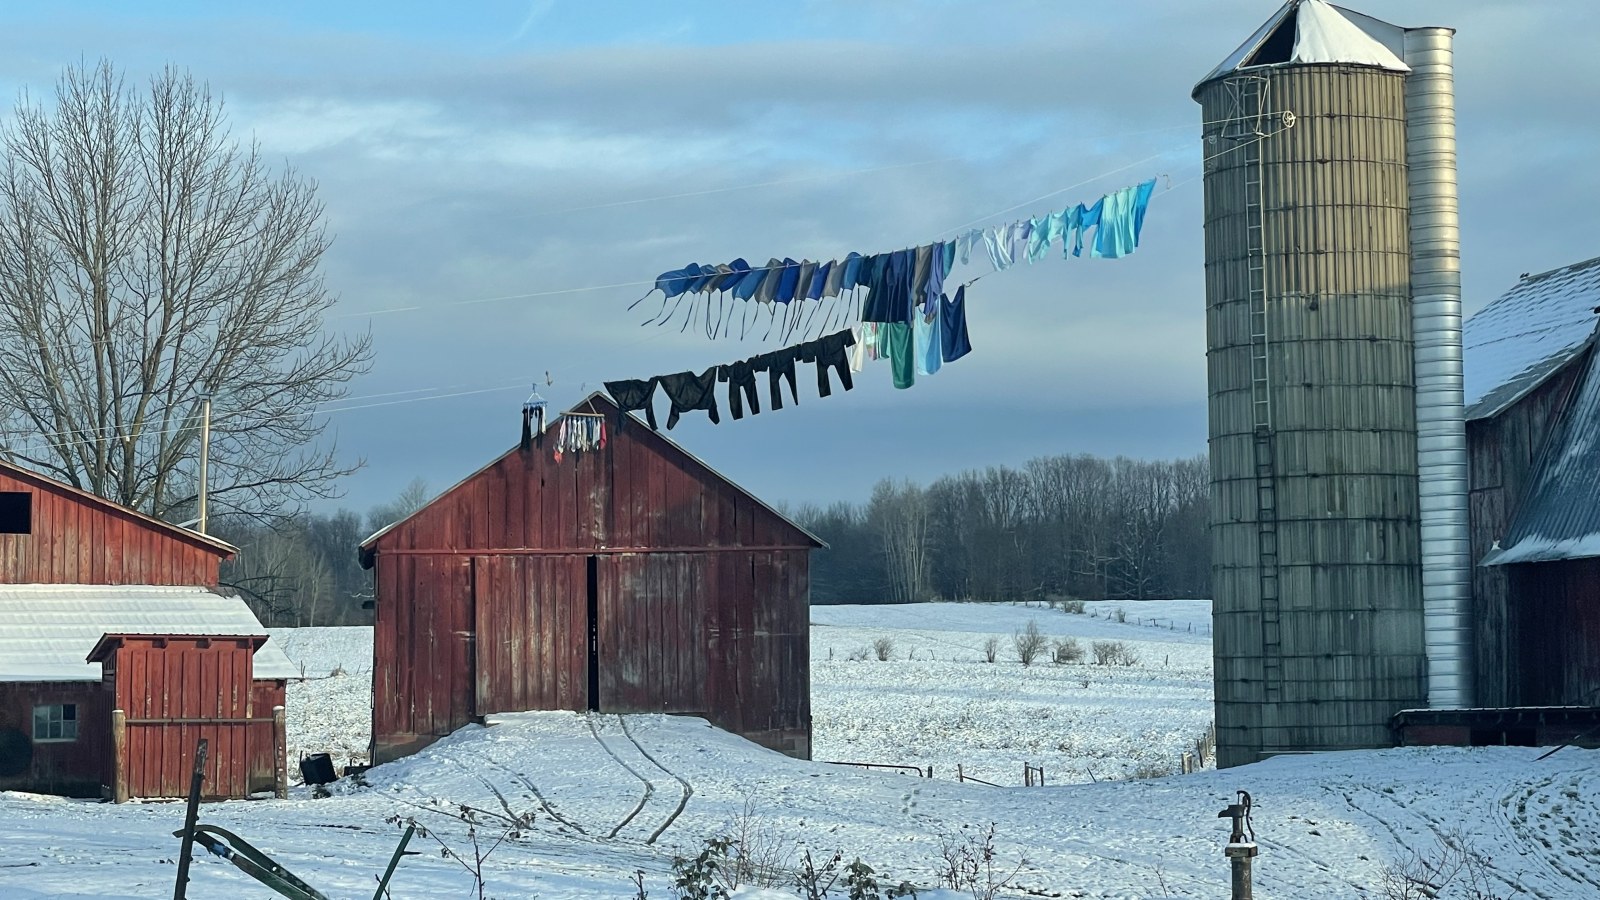 Winter Amish Clothes line